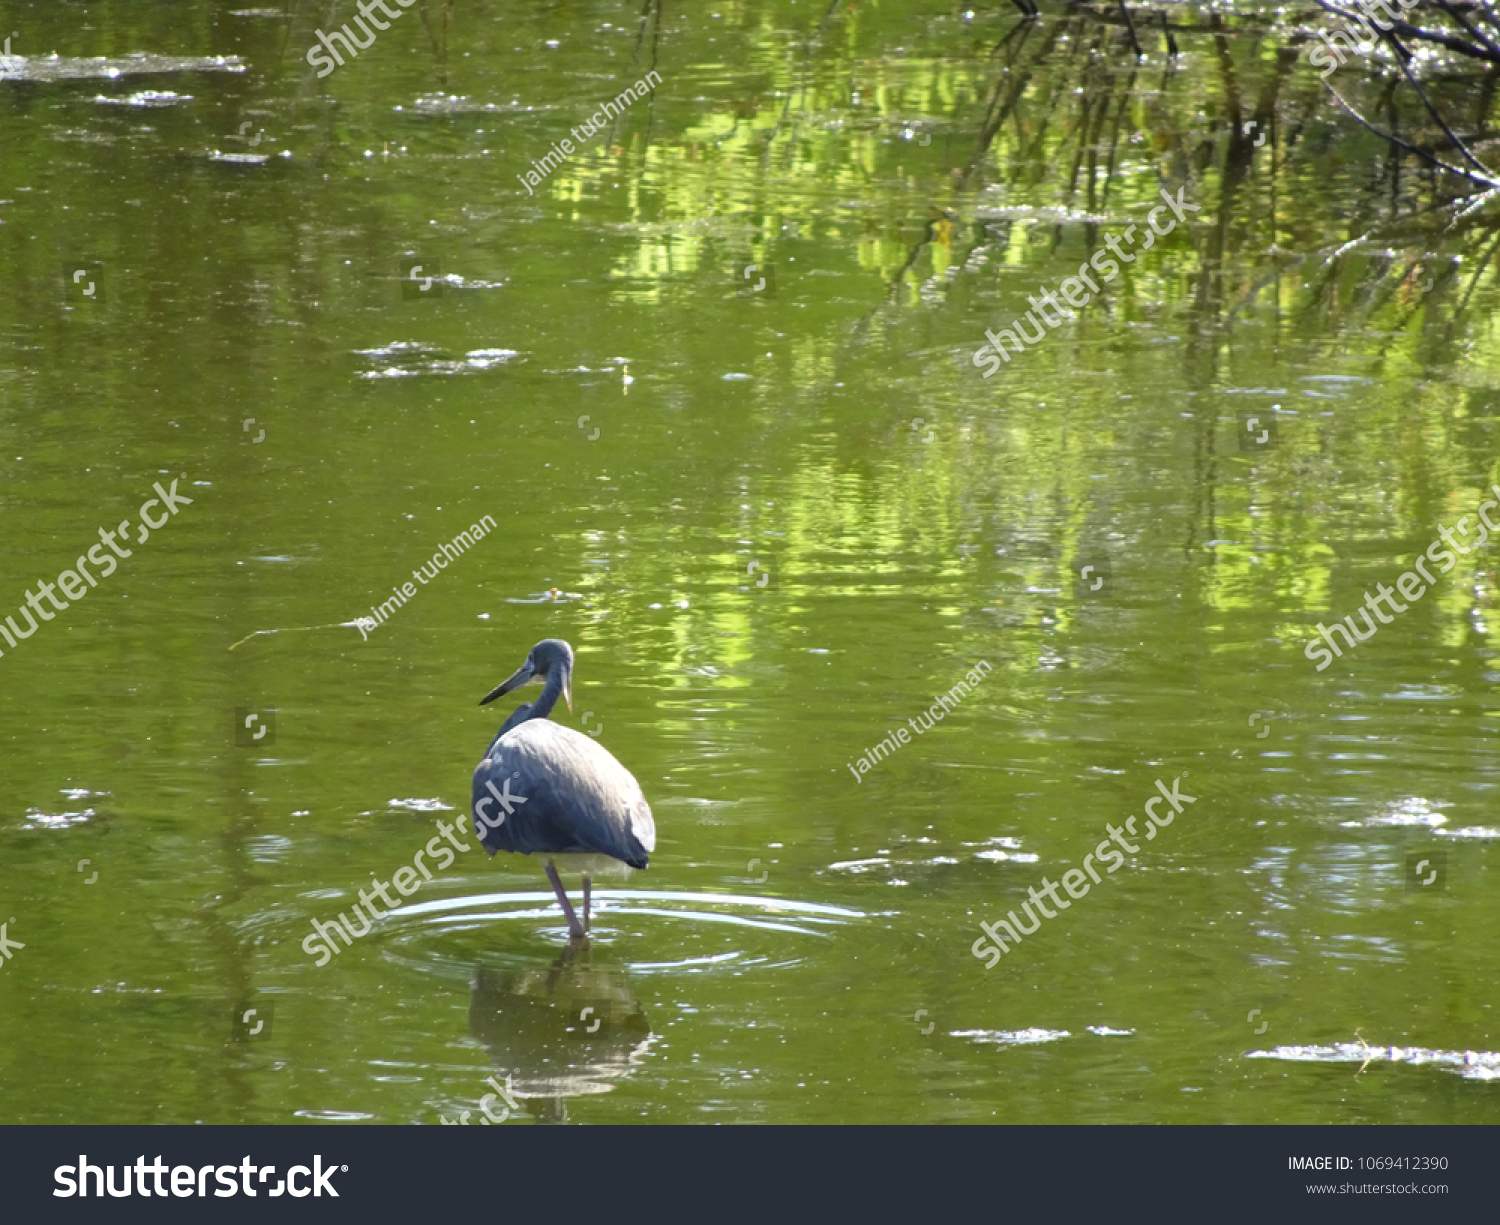 little blue heron wading in the water #1069412390